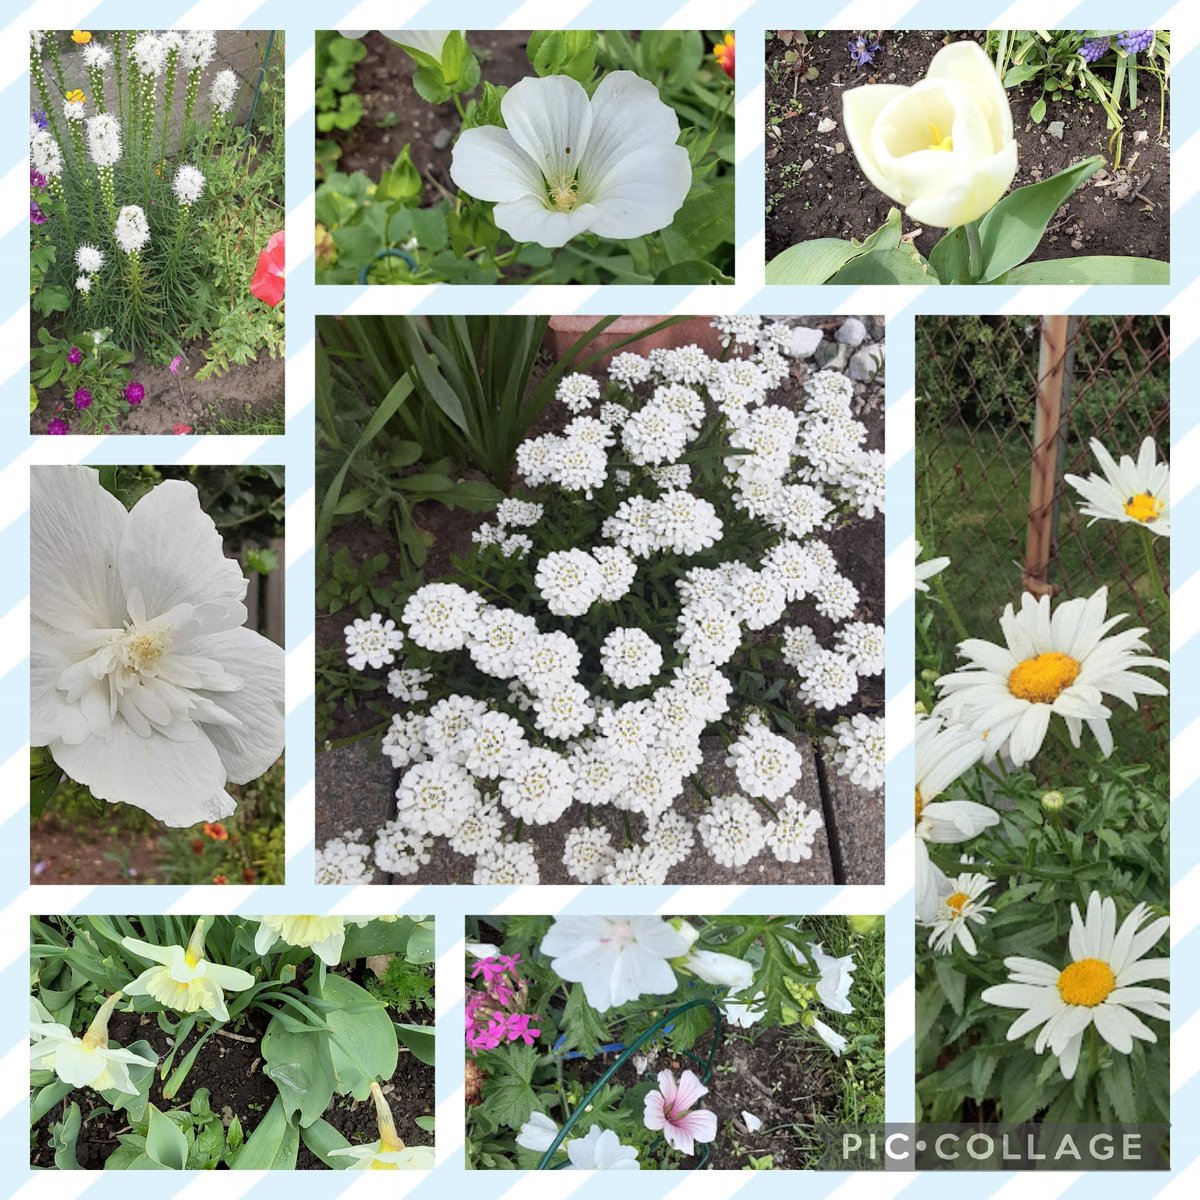 Some of my white and pastel #flowers for #sauvignonblancday from my #garden #Flowers #GardeningTwitter